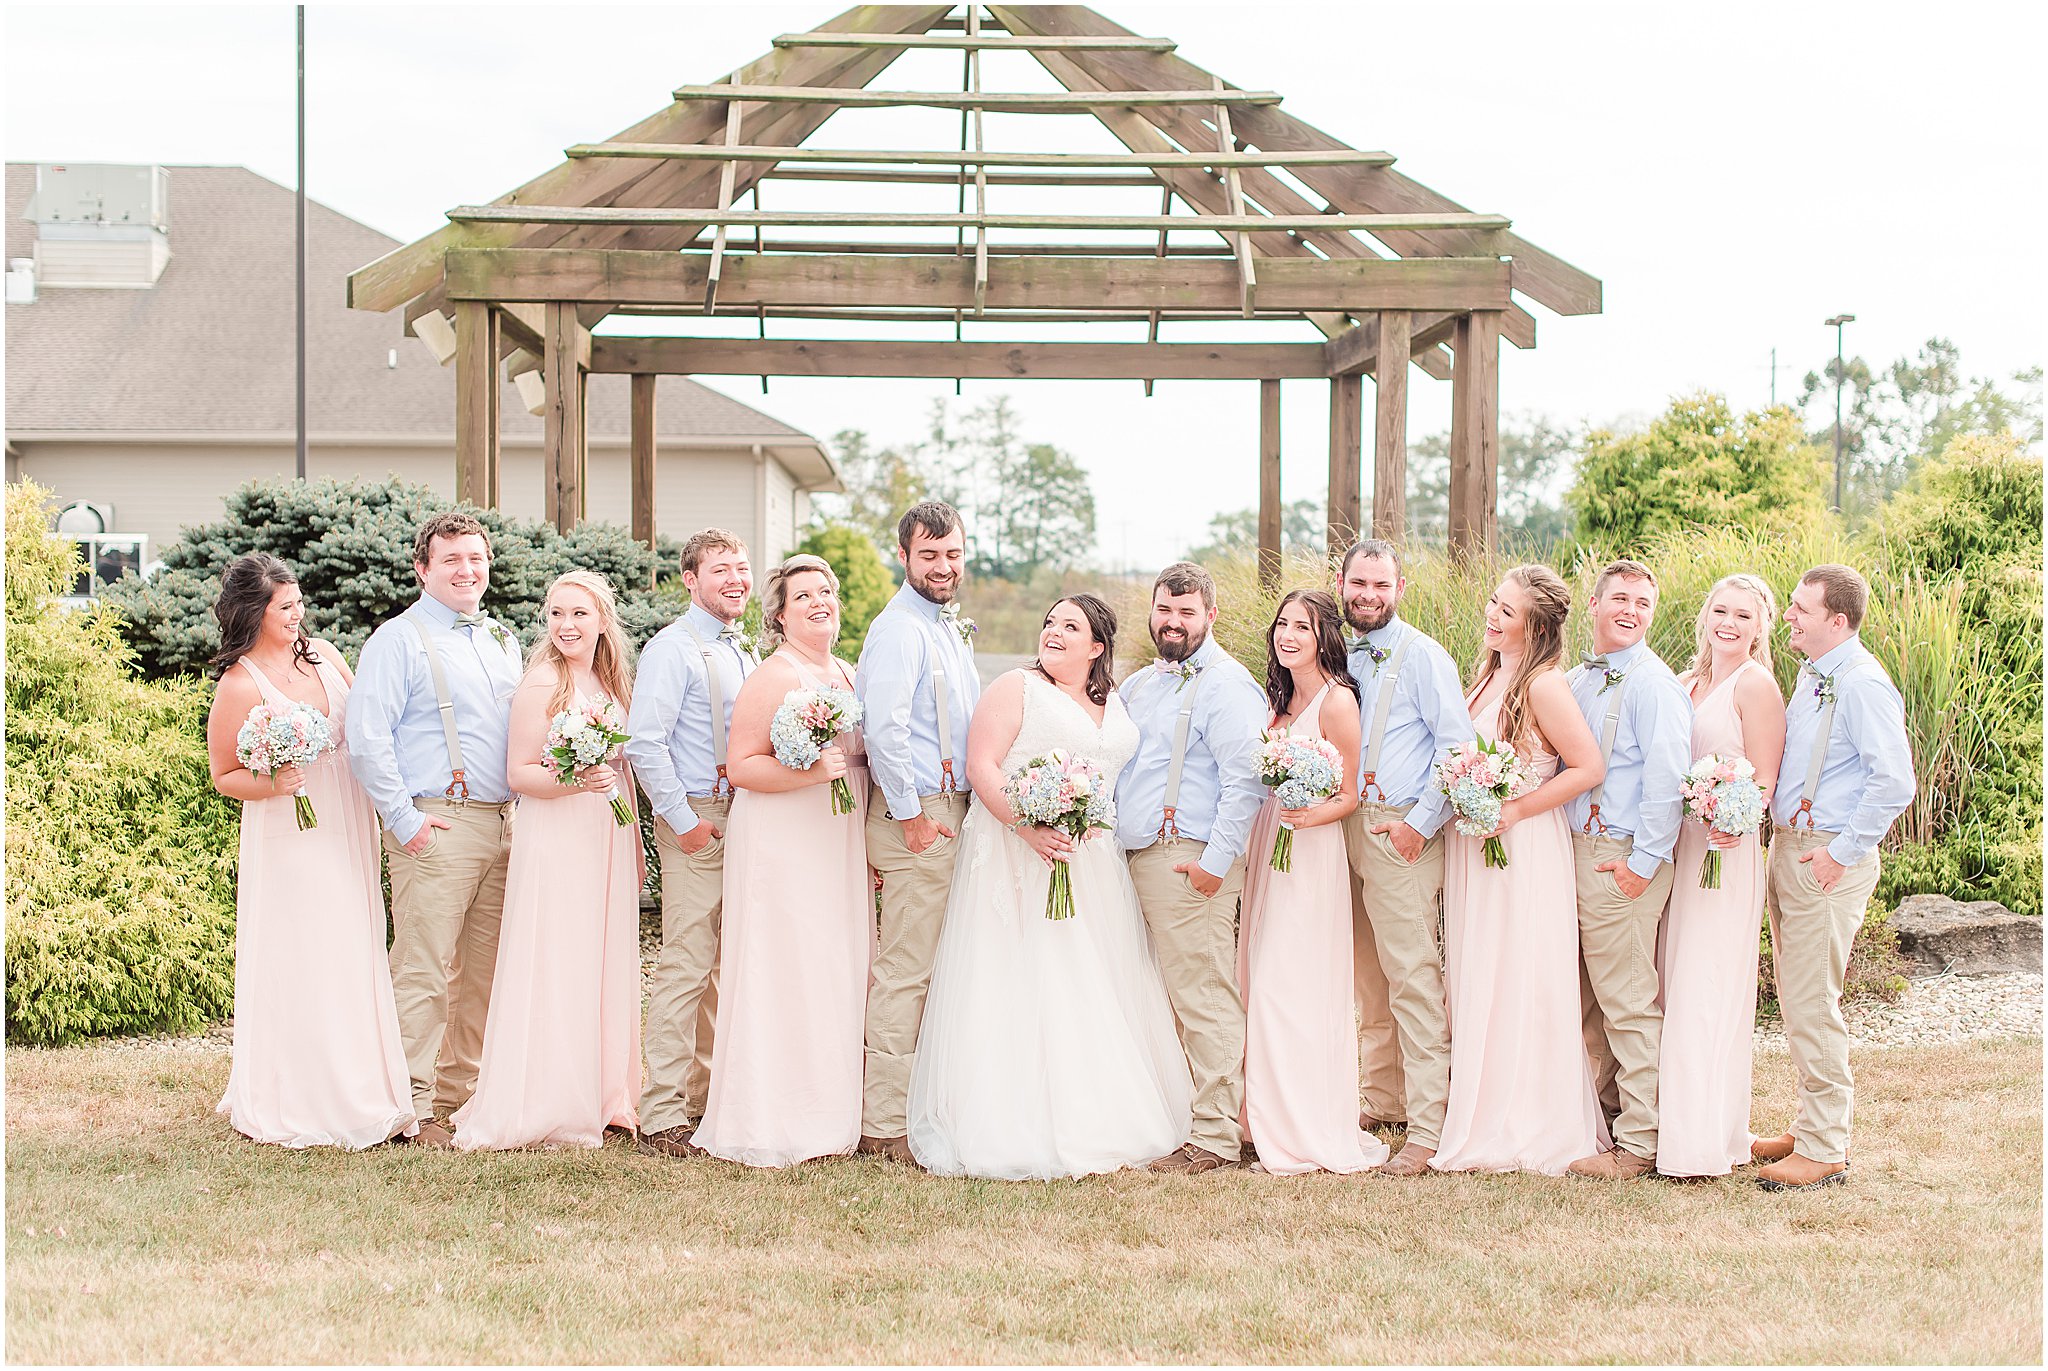 Bridal party portraits at Cornerstone Hall in Salem, IN